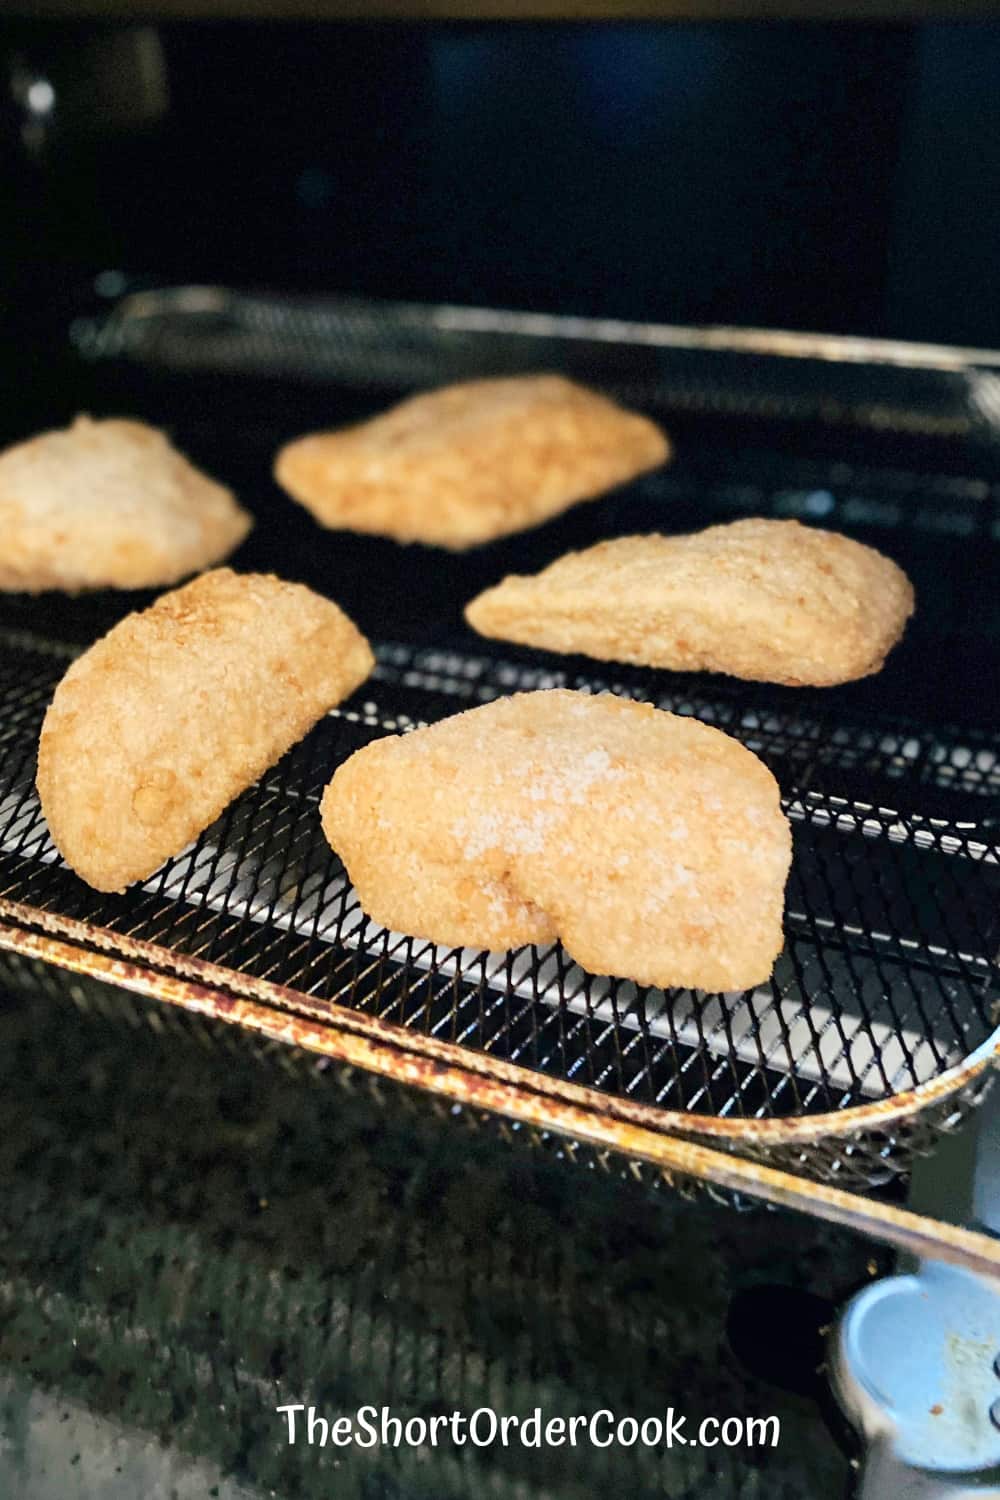 5 pieces of breaded fish on the air fryer tray